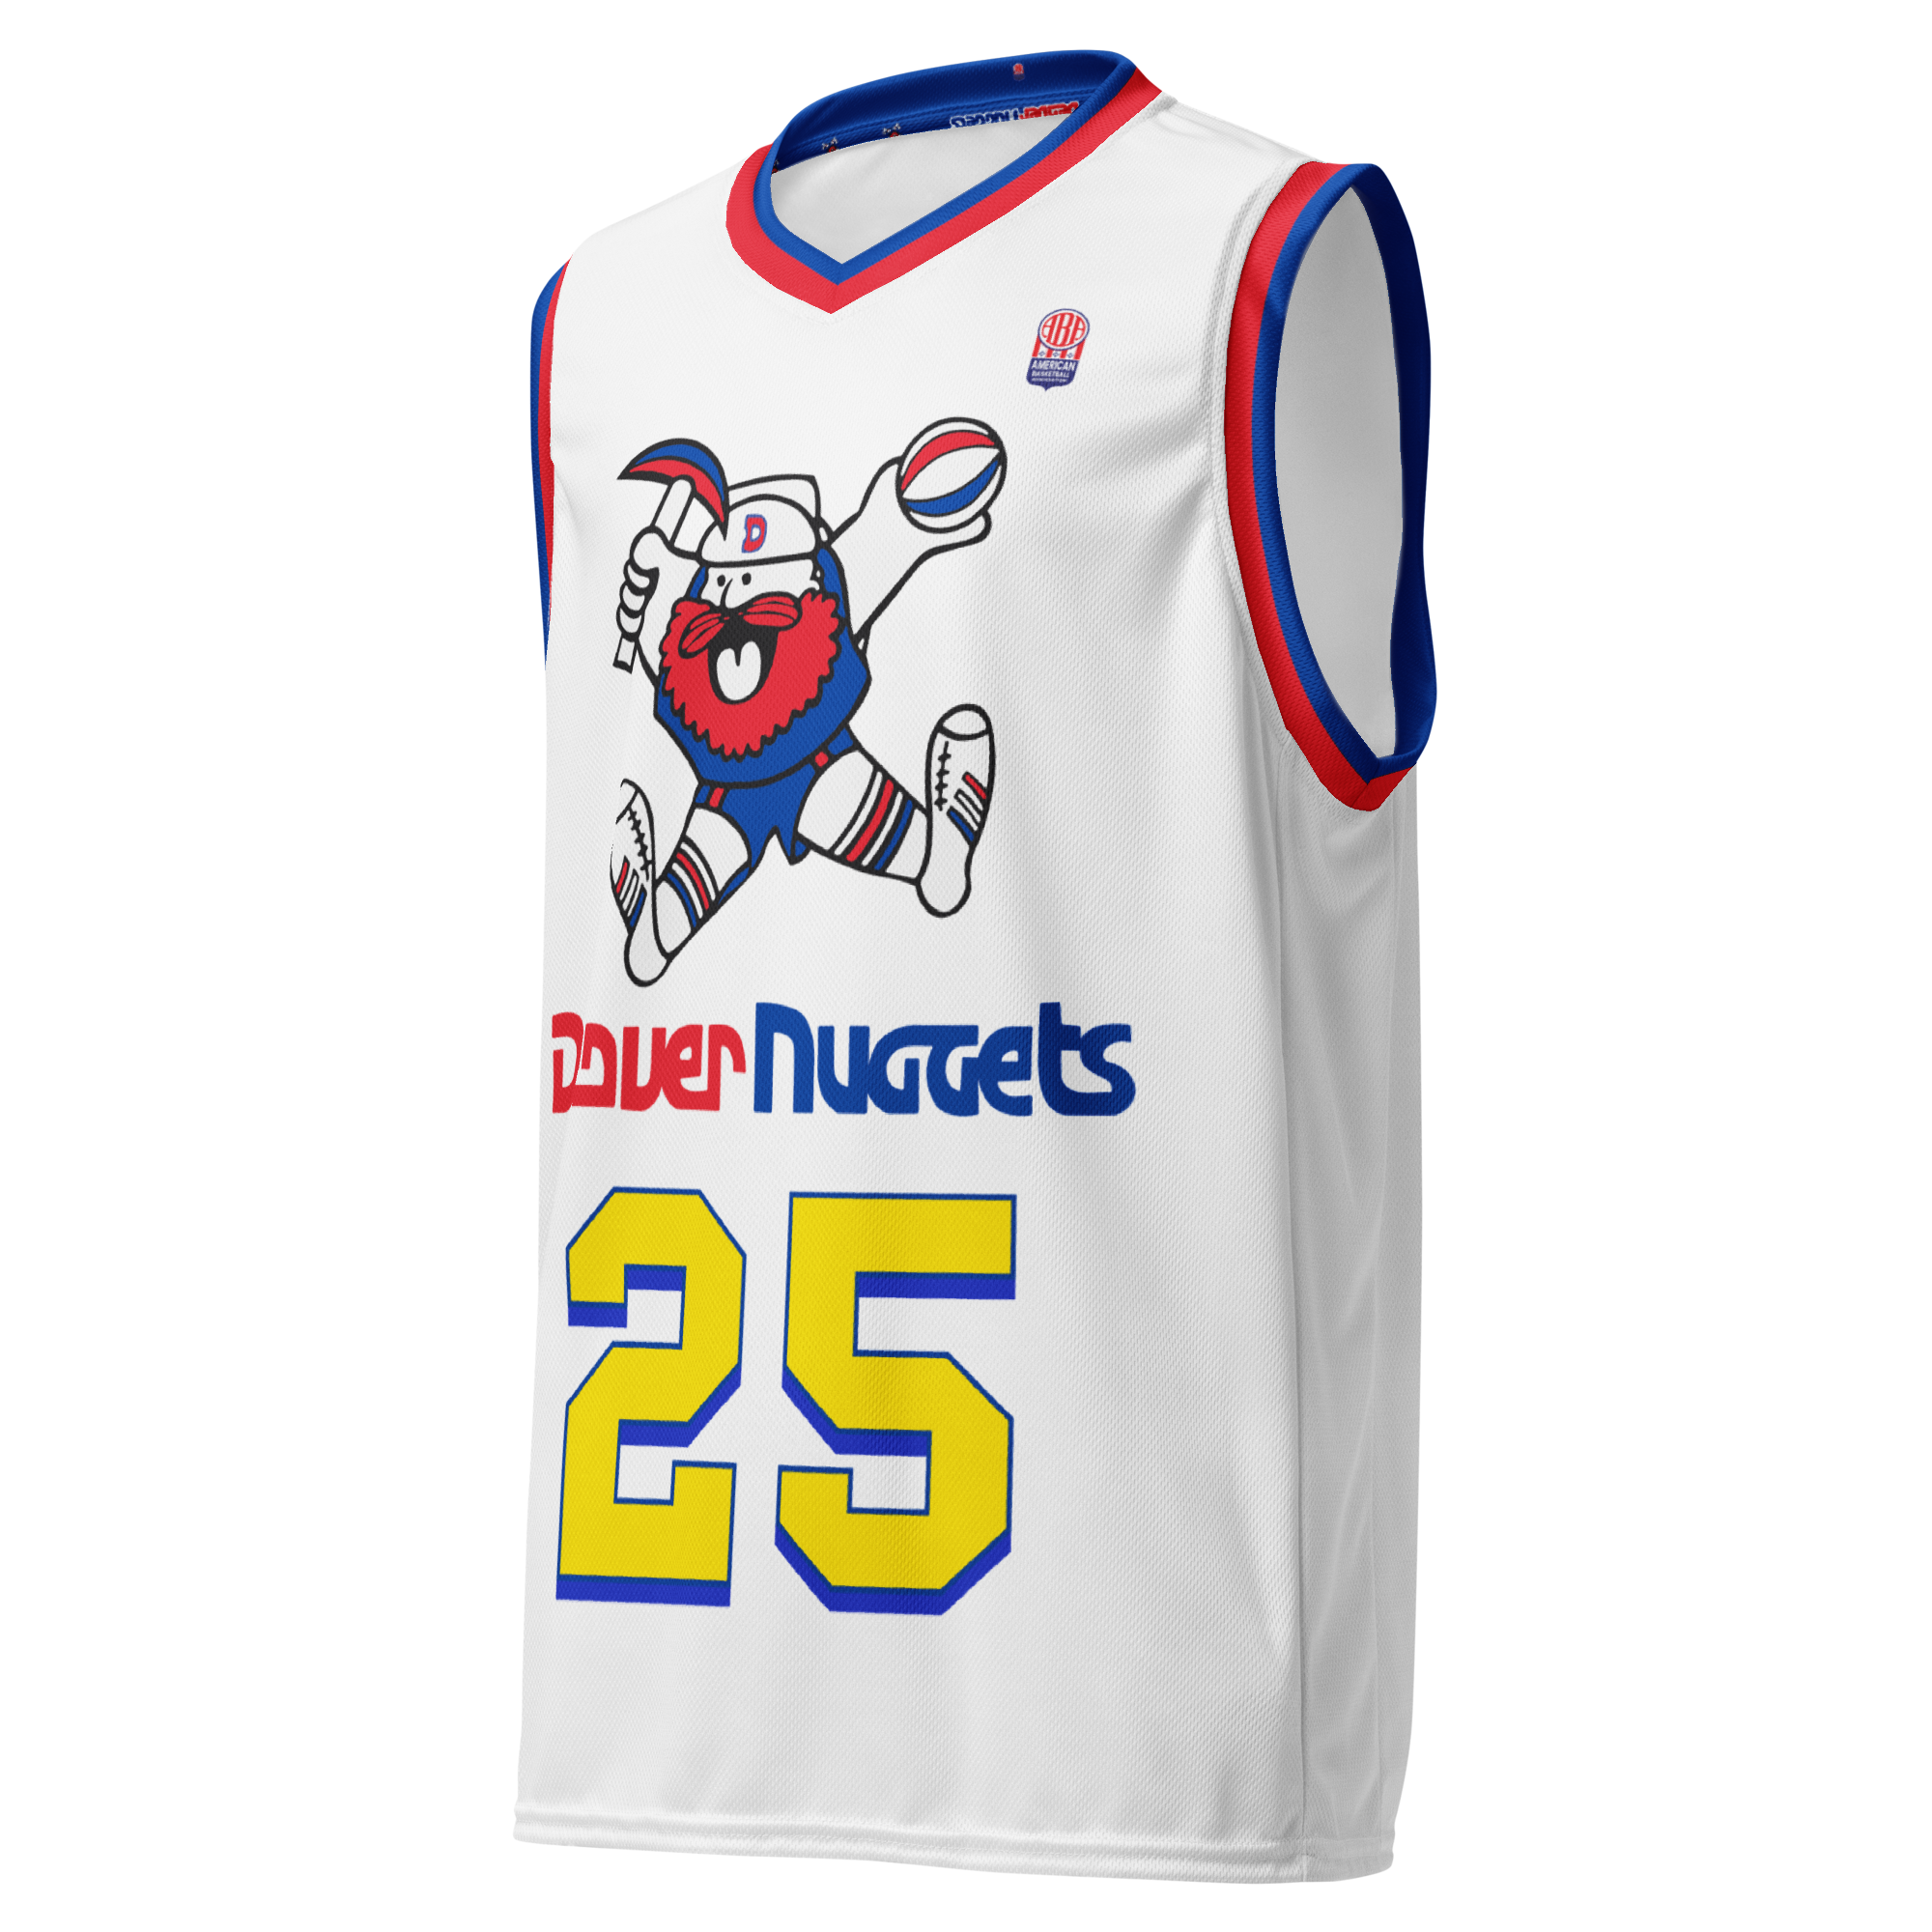 abamx Store Step Back in Time and Honor The Legendary Dan Issel with The Blue Nuggets Retro Jersey! Limited-time Offer, So Don't Miss Out! 4XL